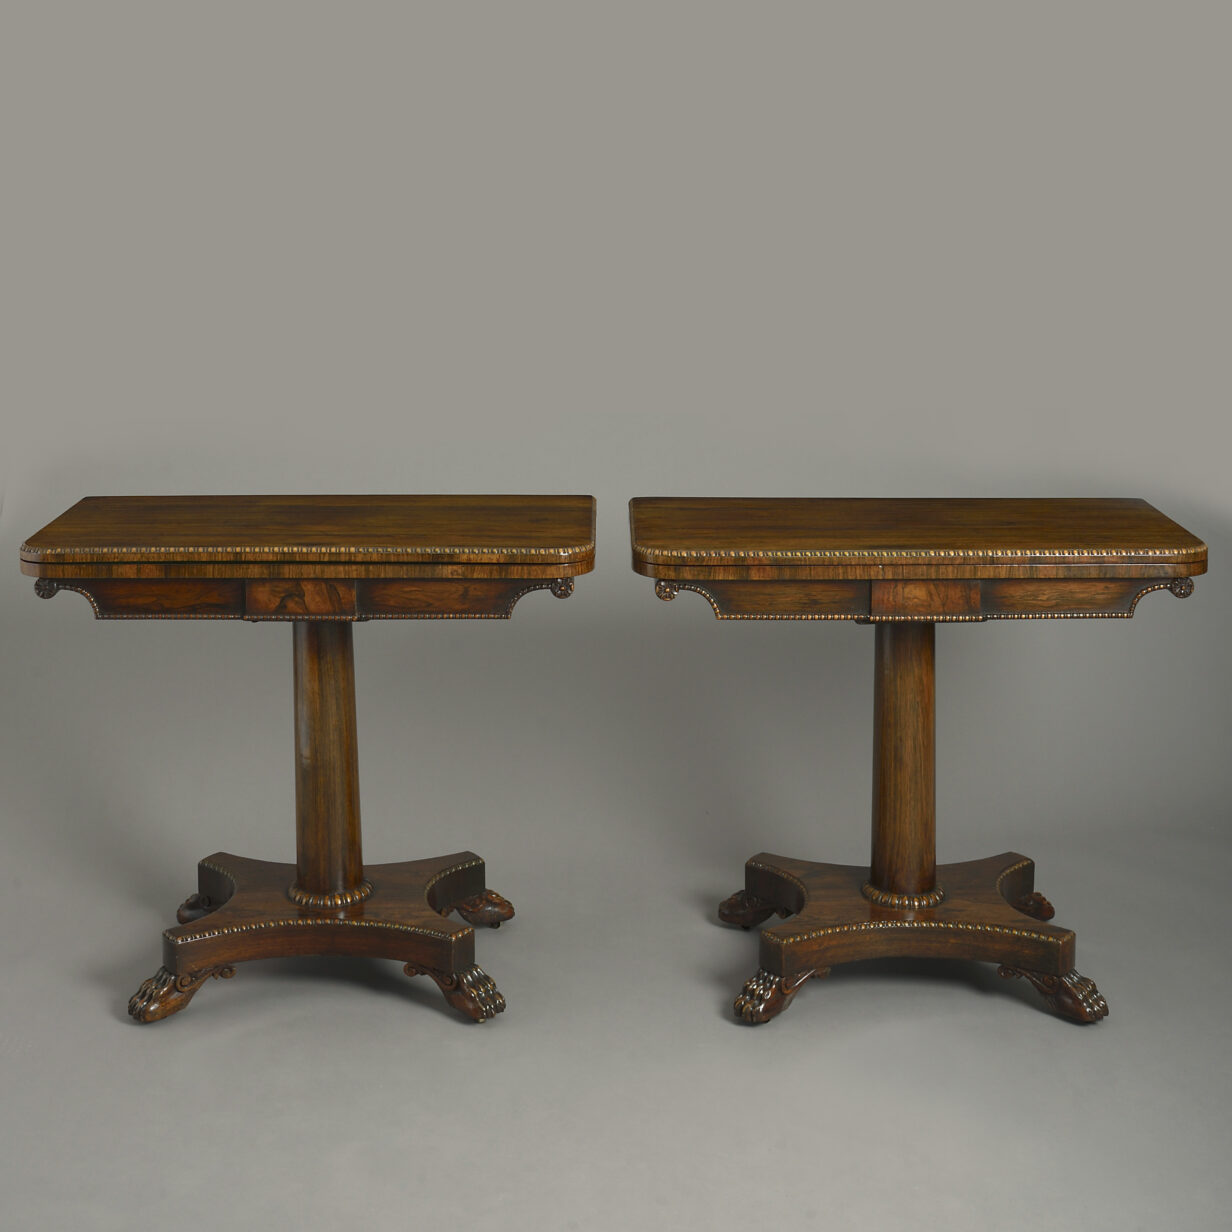 Pair of Early 19th Century Regency Period Rosewood Card Tables